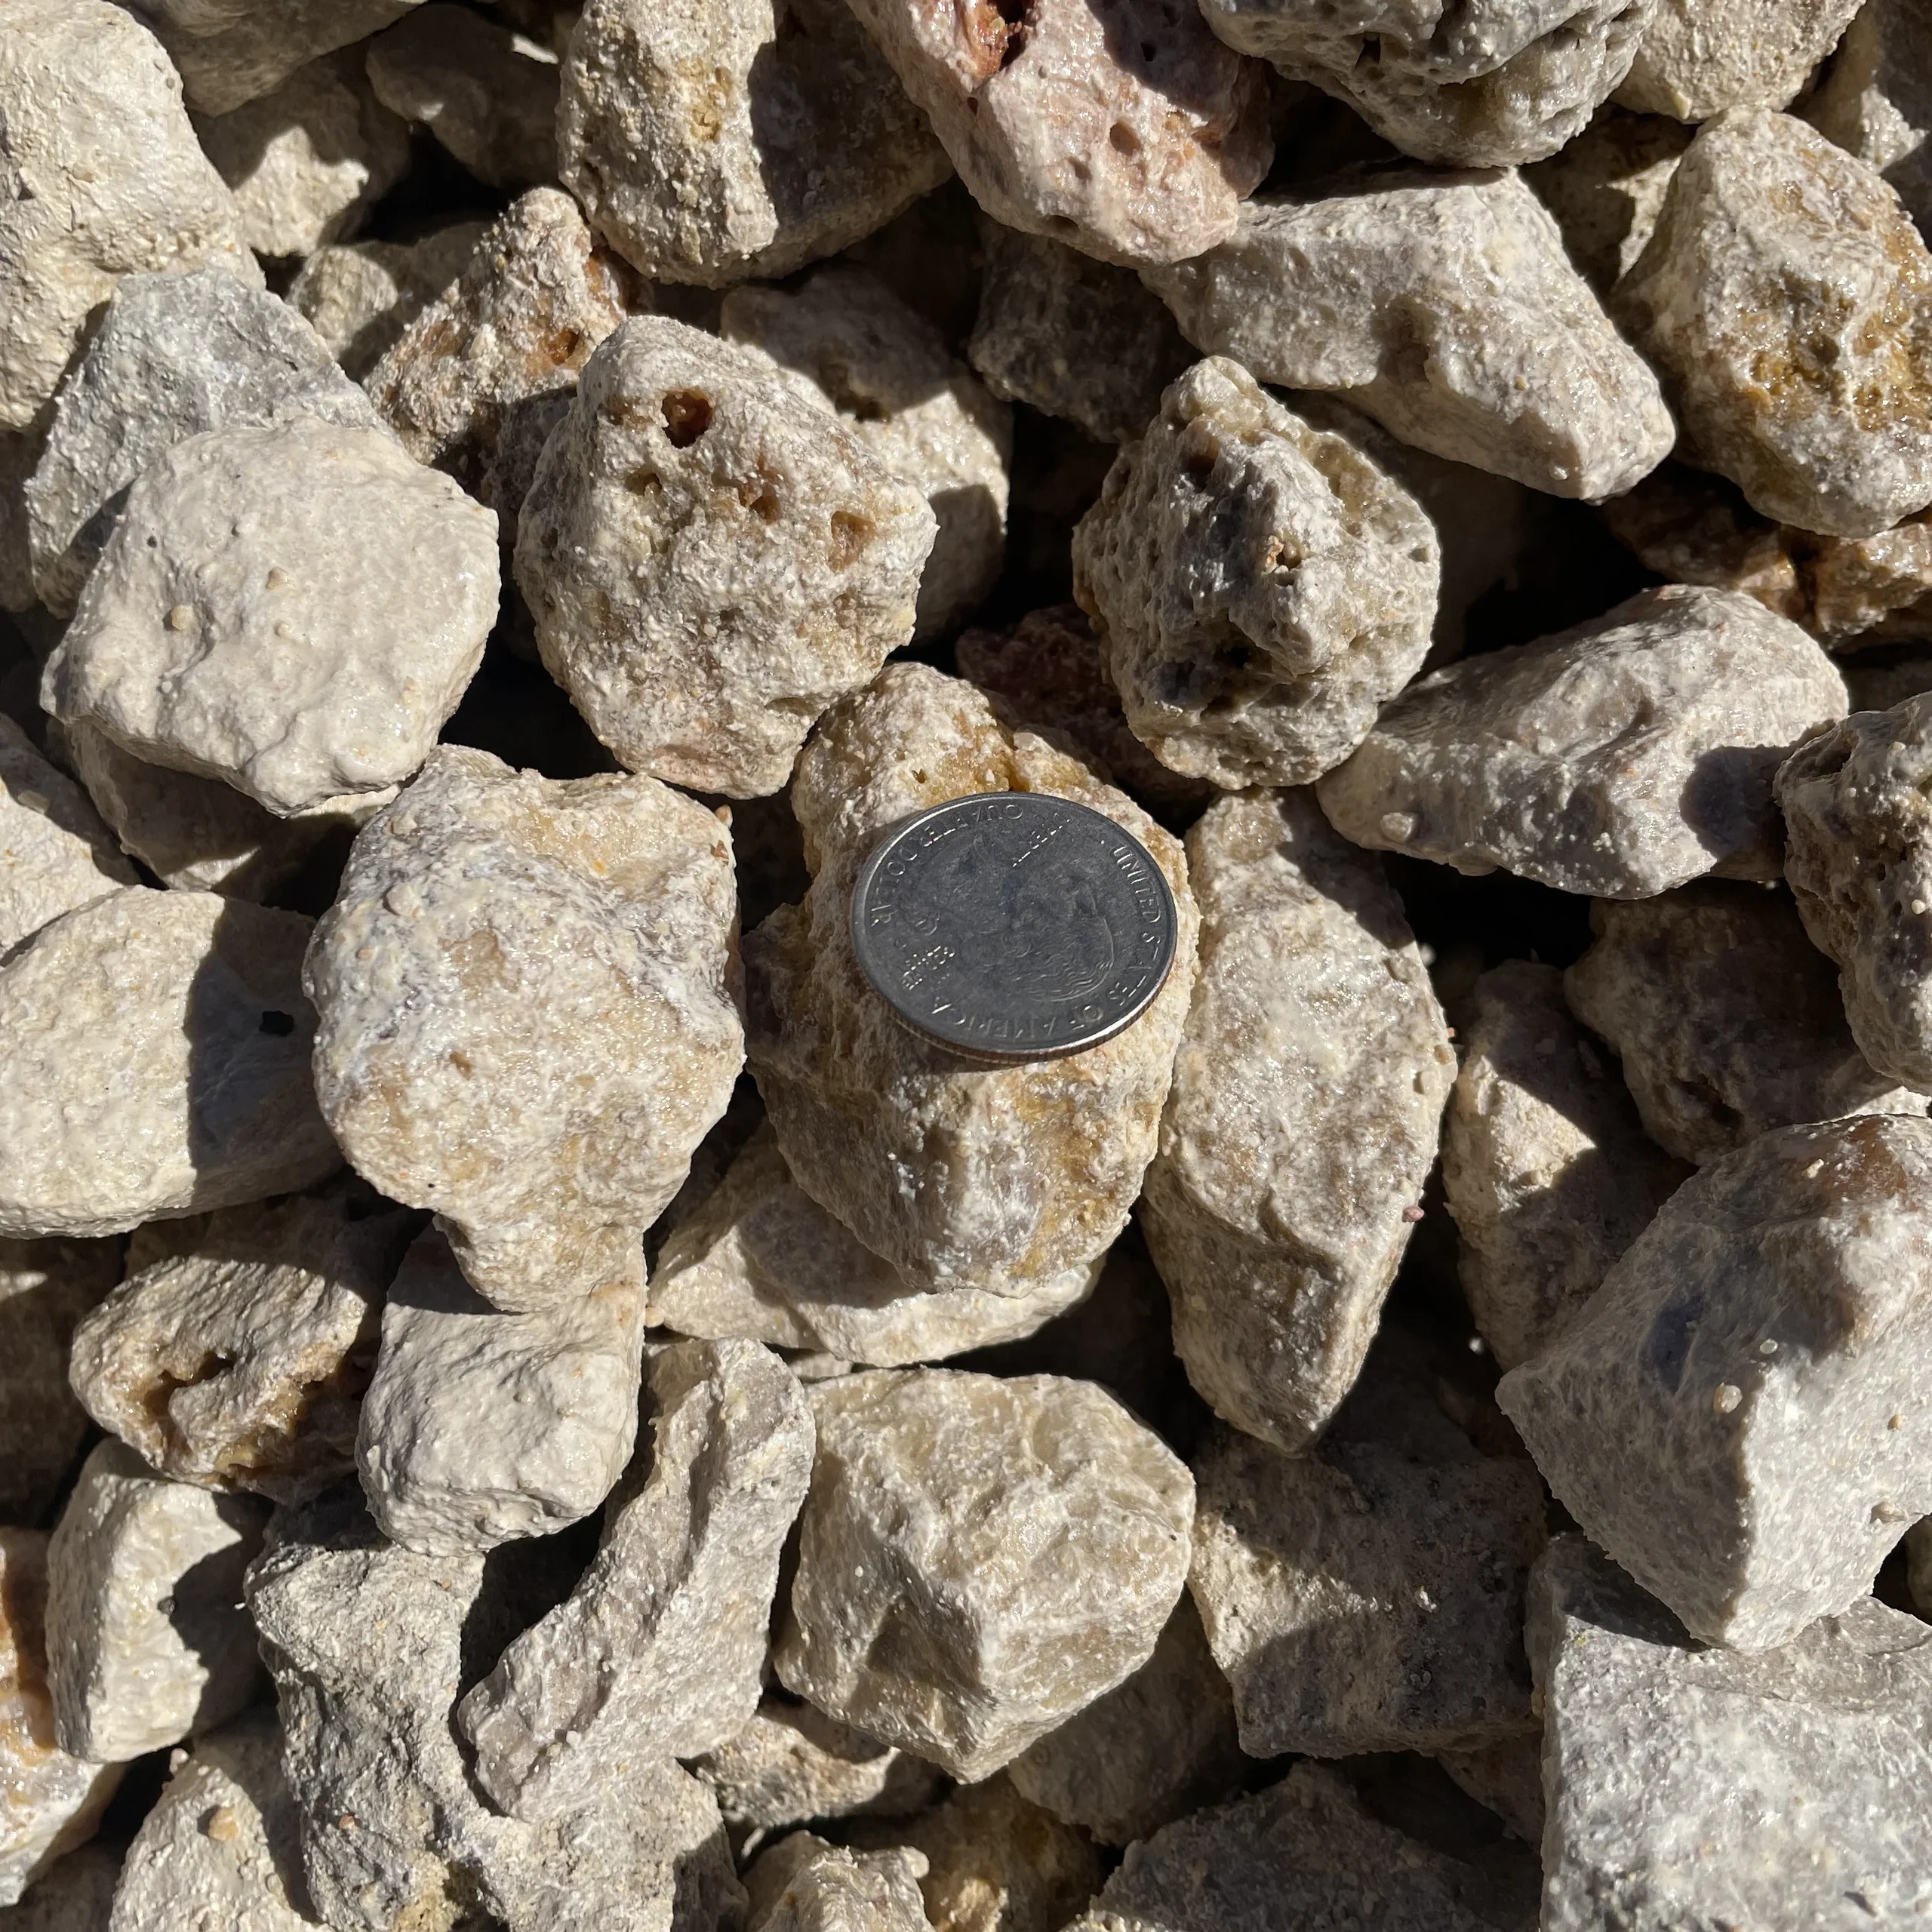 1.5" Limestone Gravel for Sale and Delivery for Pflugerville Texas